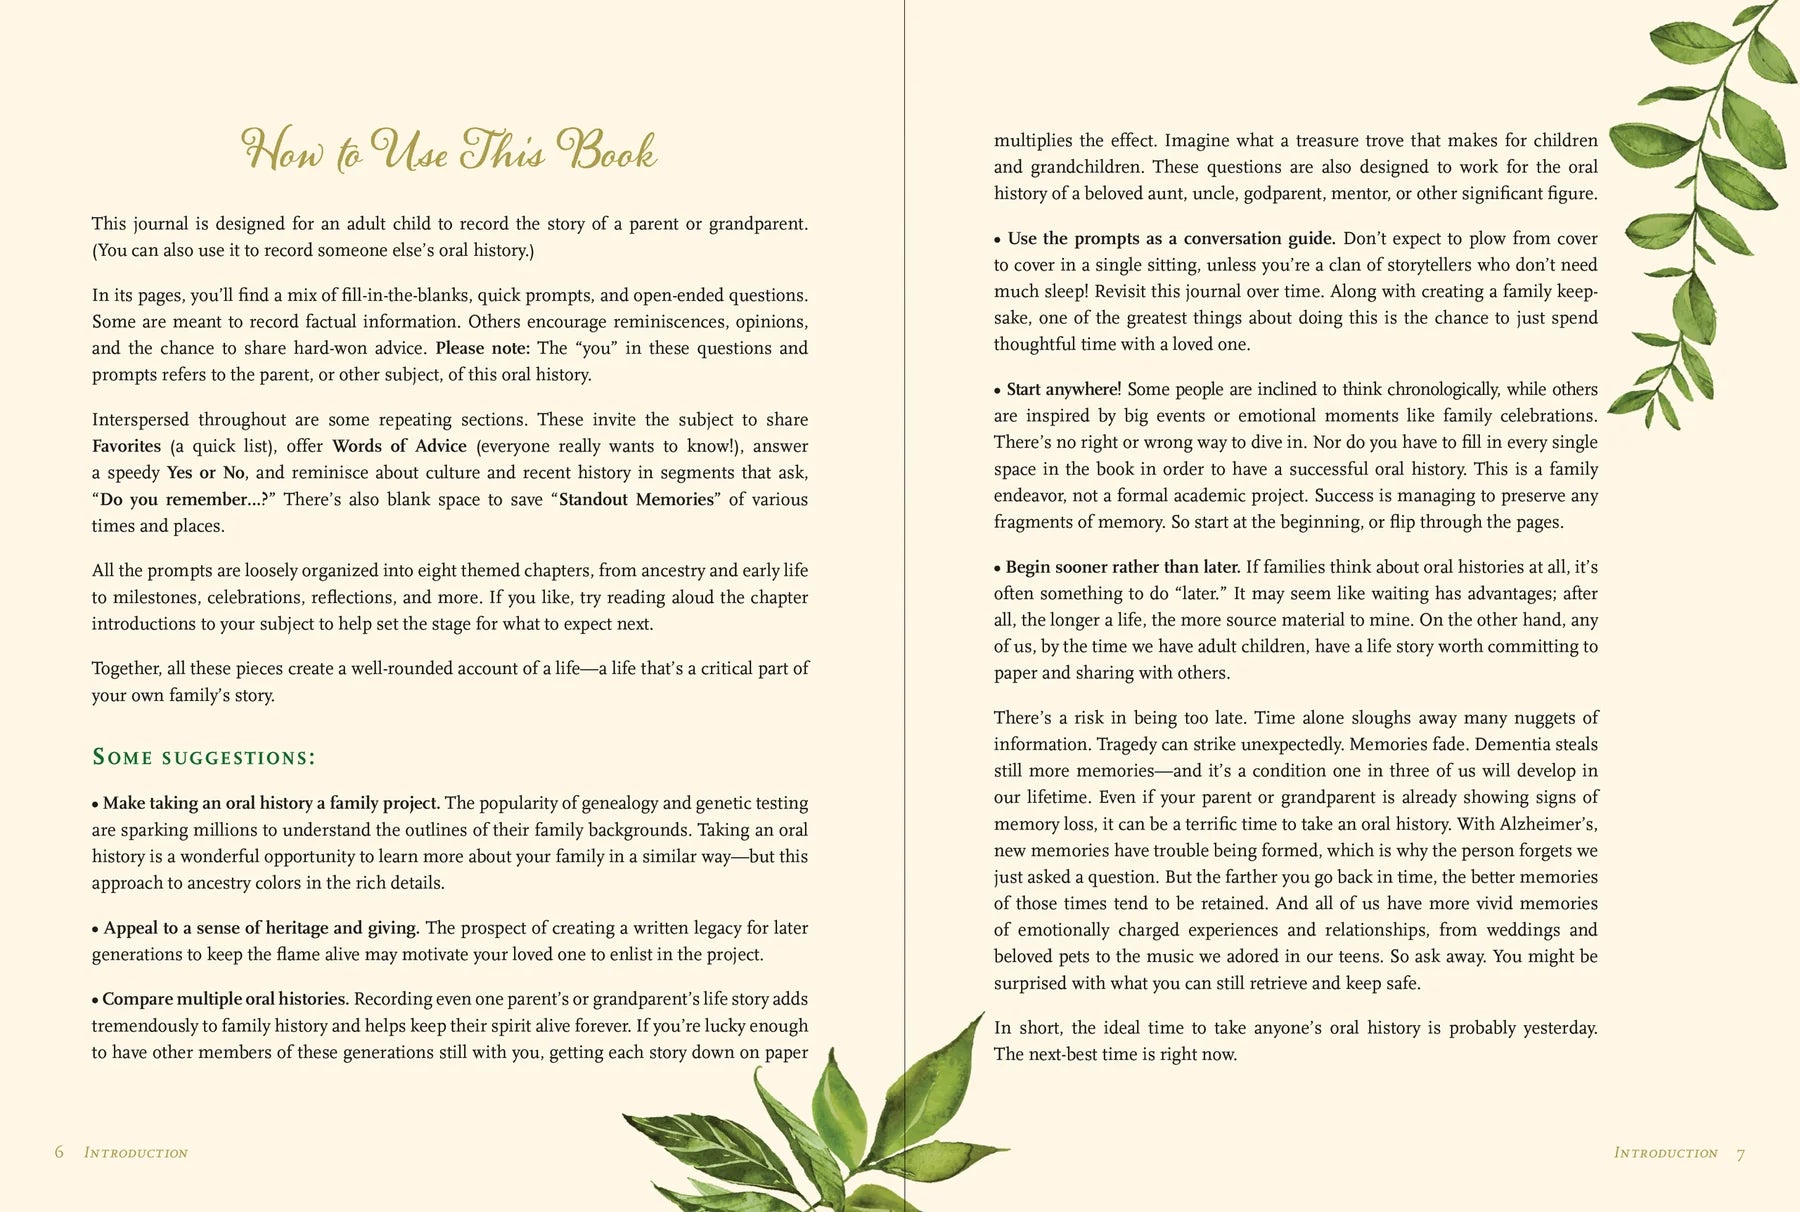 two pages with decorative plants across it, and text on how to use the book